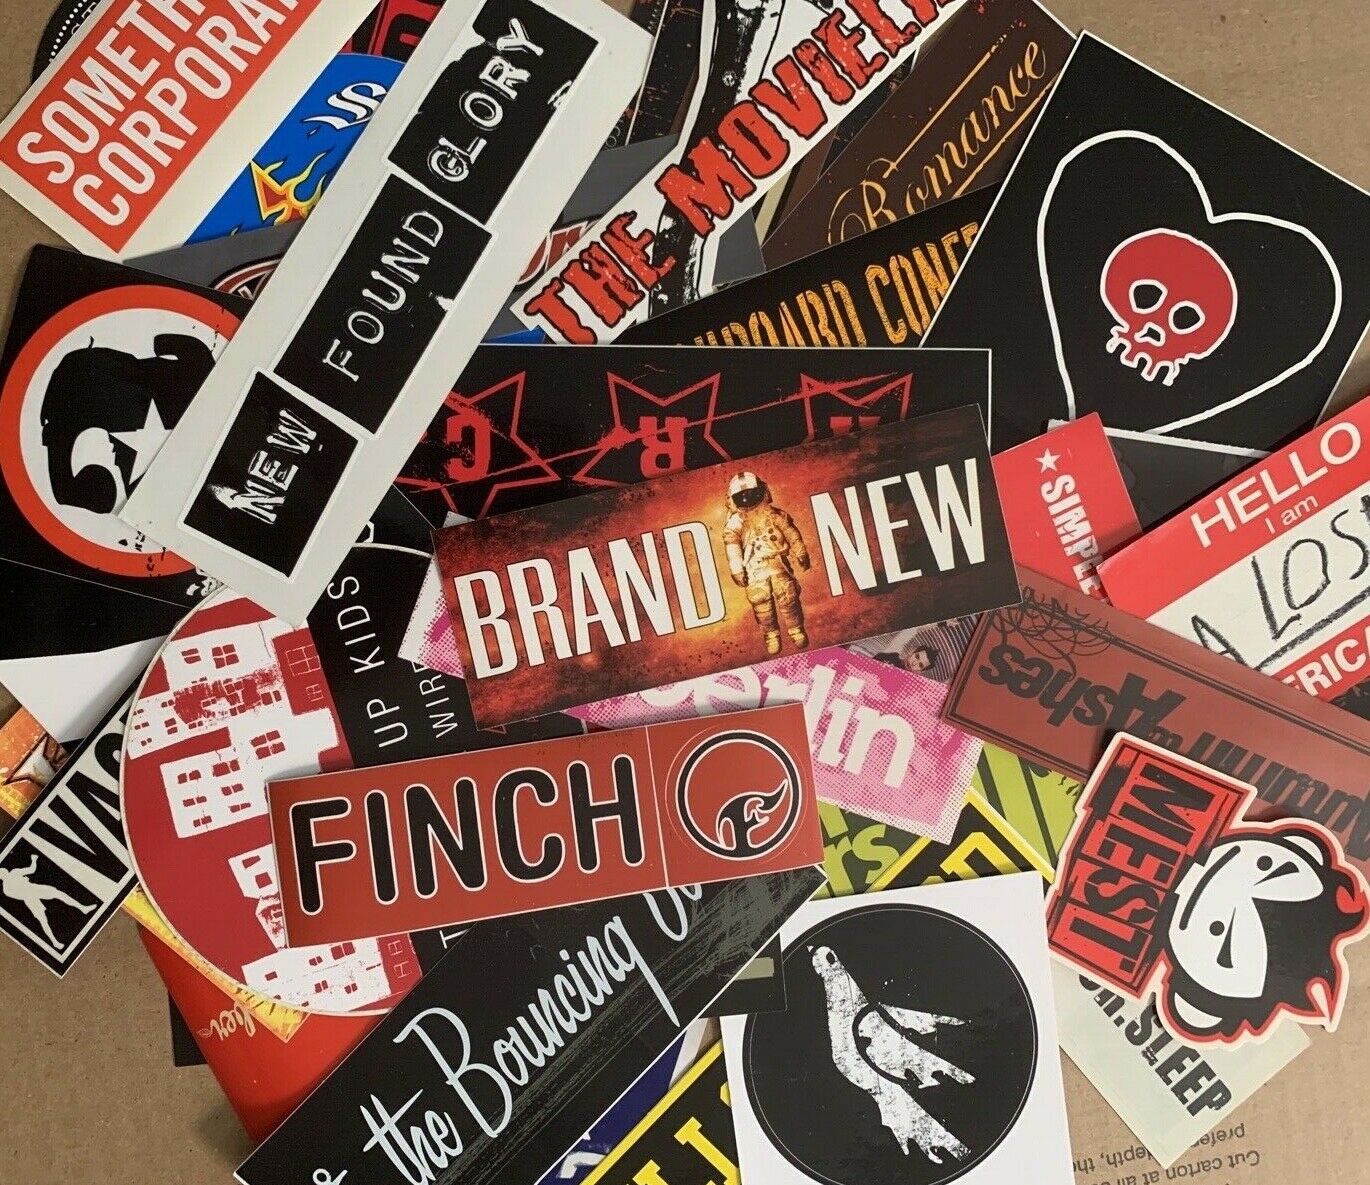 Punk Rock Promo Music Stickers - Buy 4 Get 25% Off - Customize Your Sticker Lot